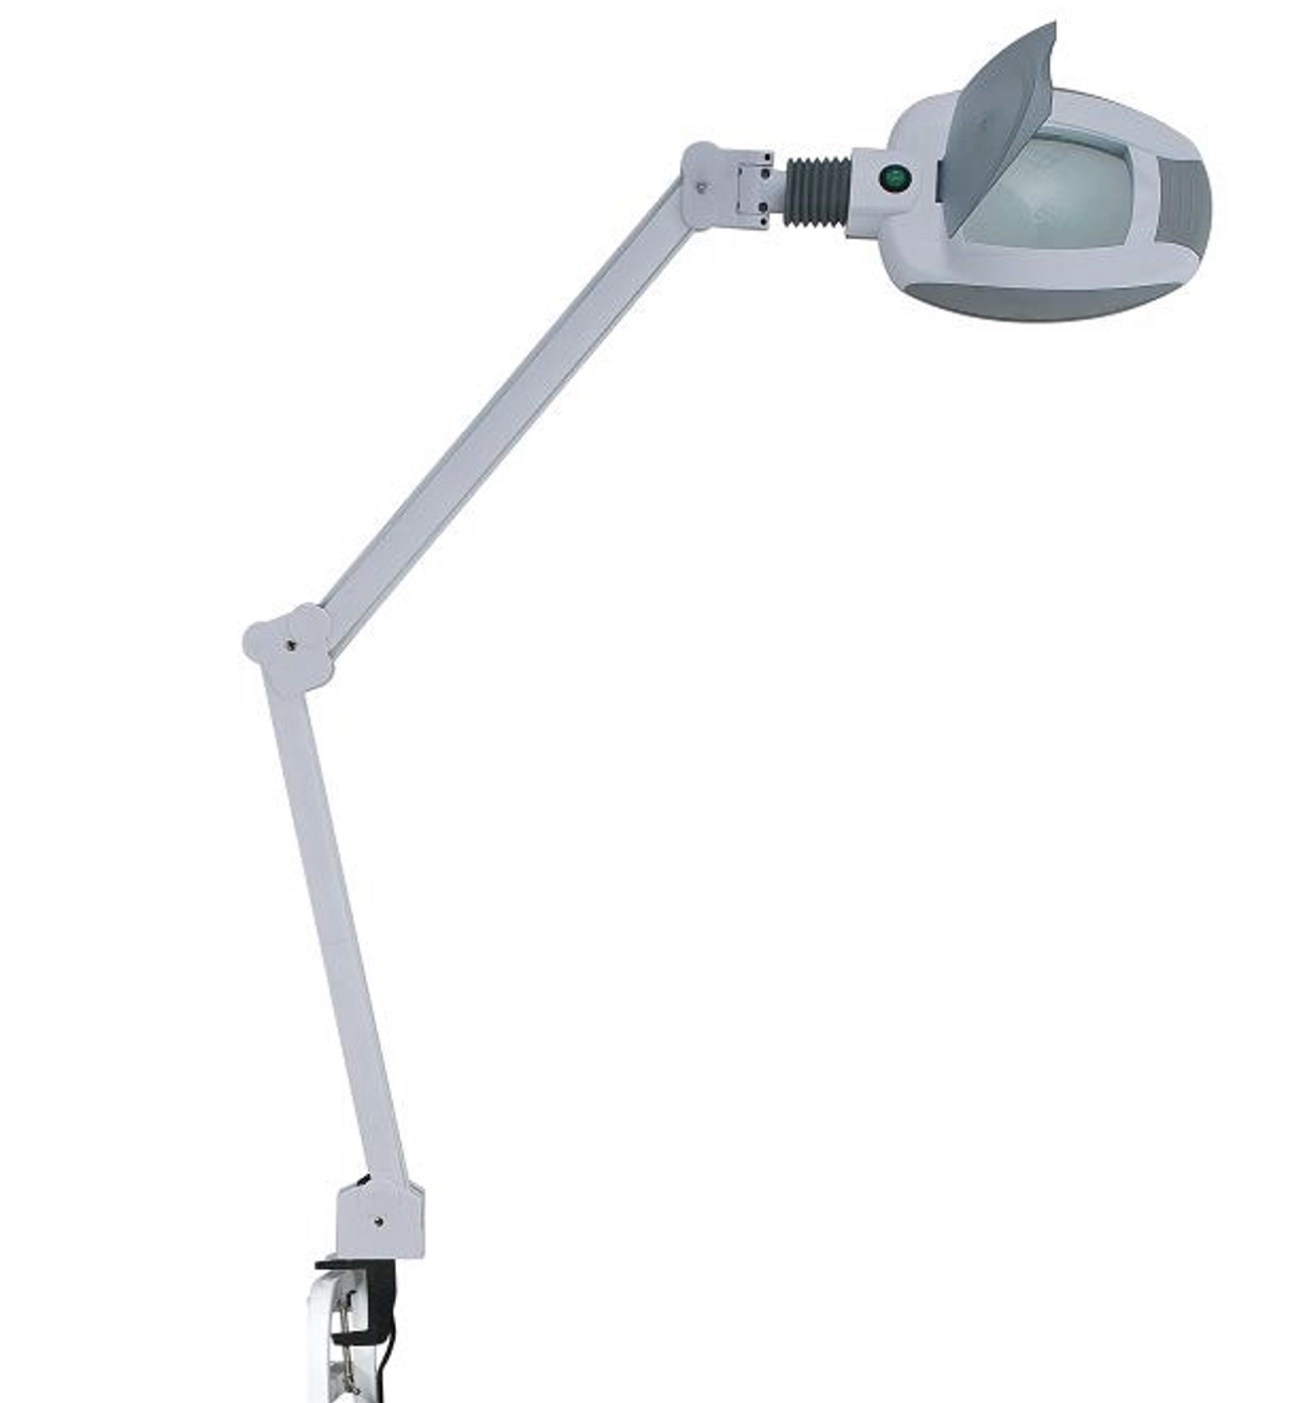 mag-lamp-no-stand-sf-1005t.jpg